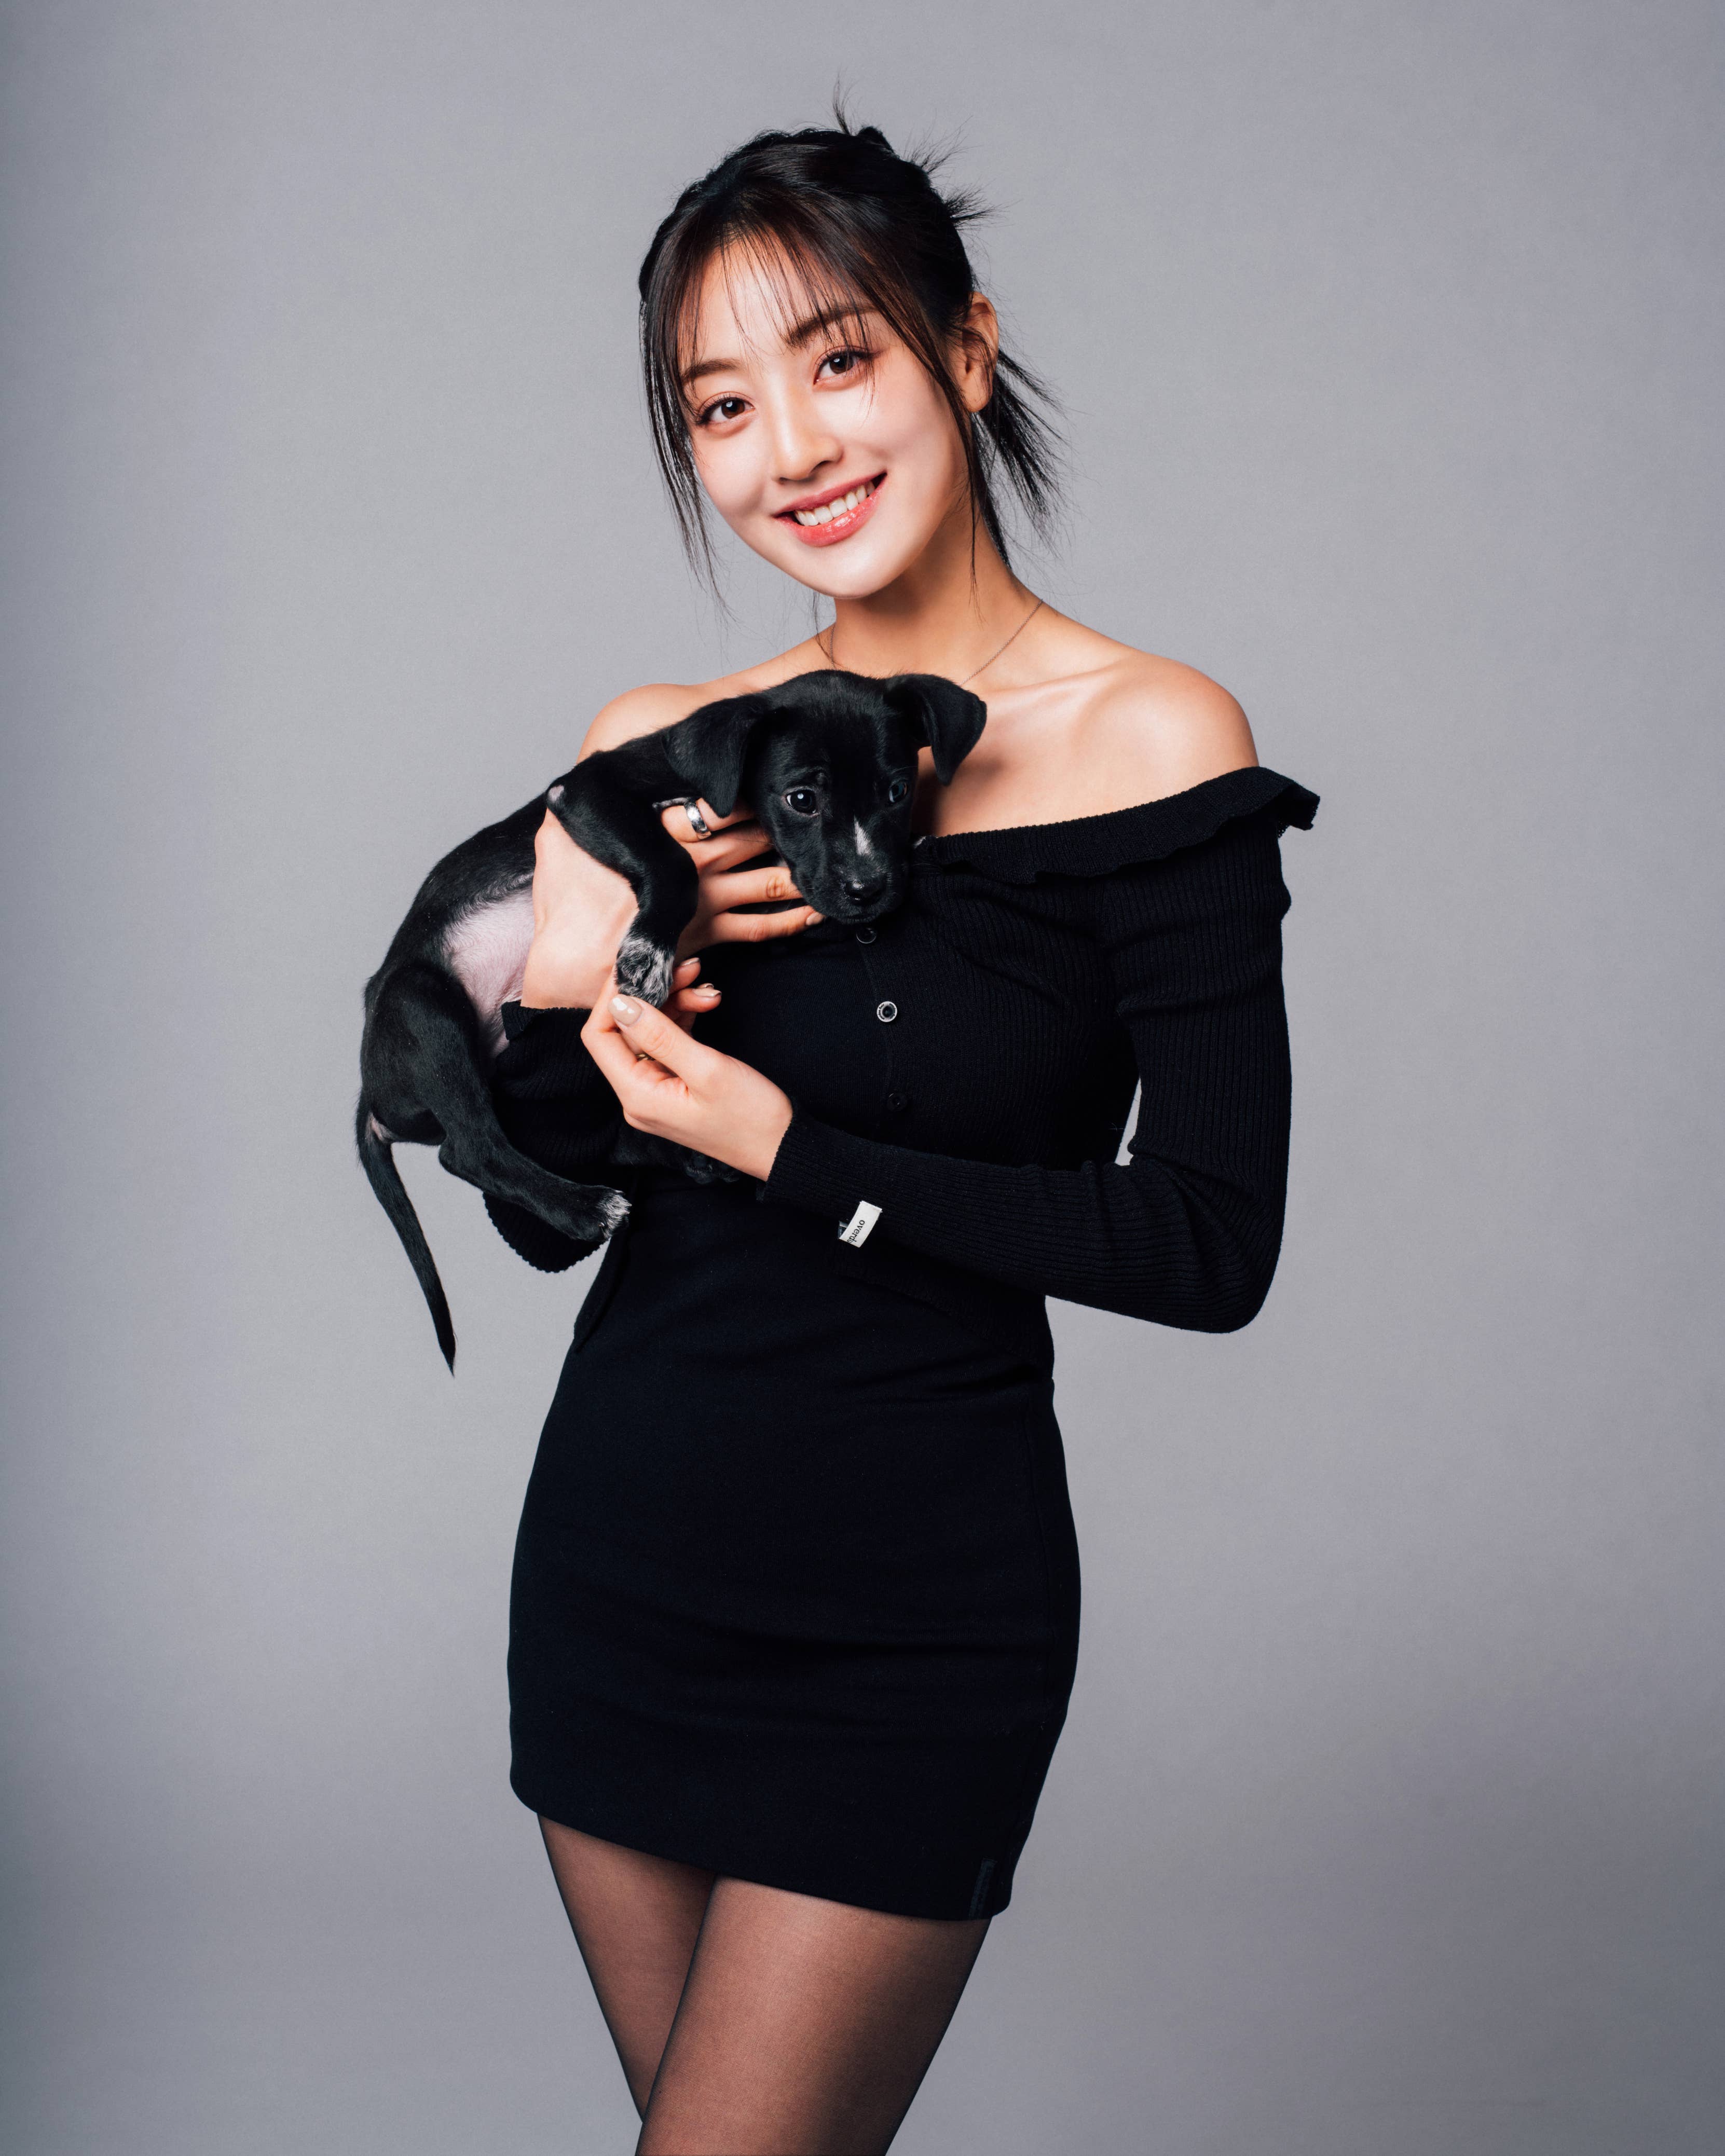 Woman in an off-shoulder dress holds a small dog